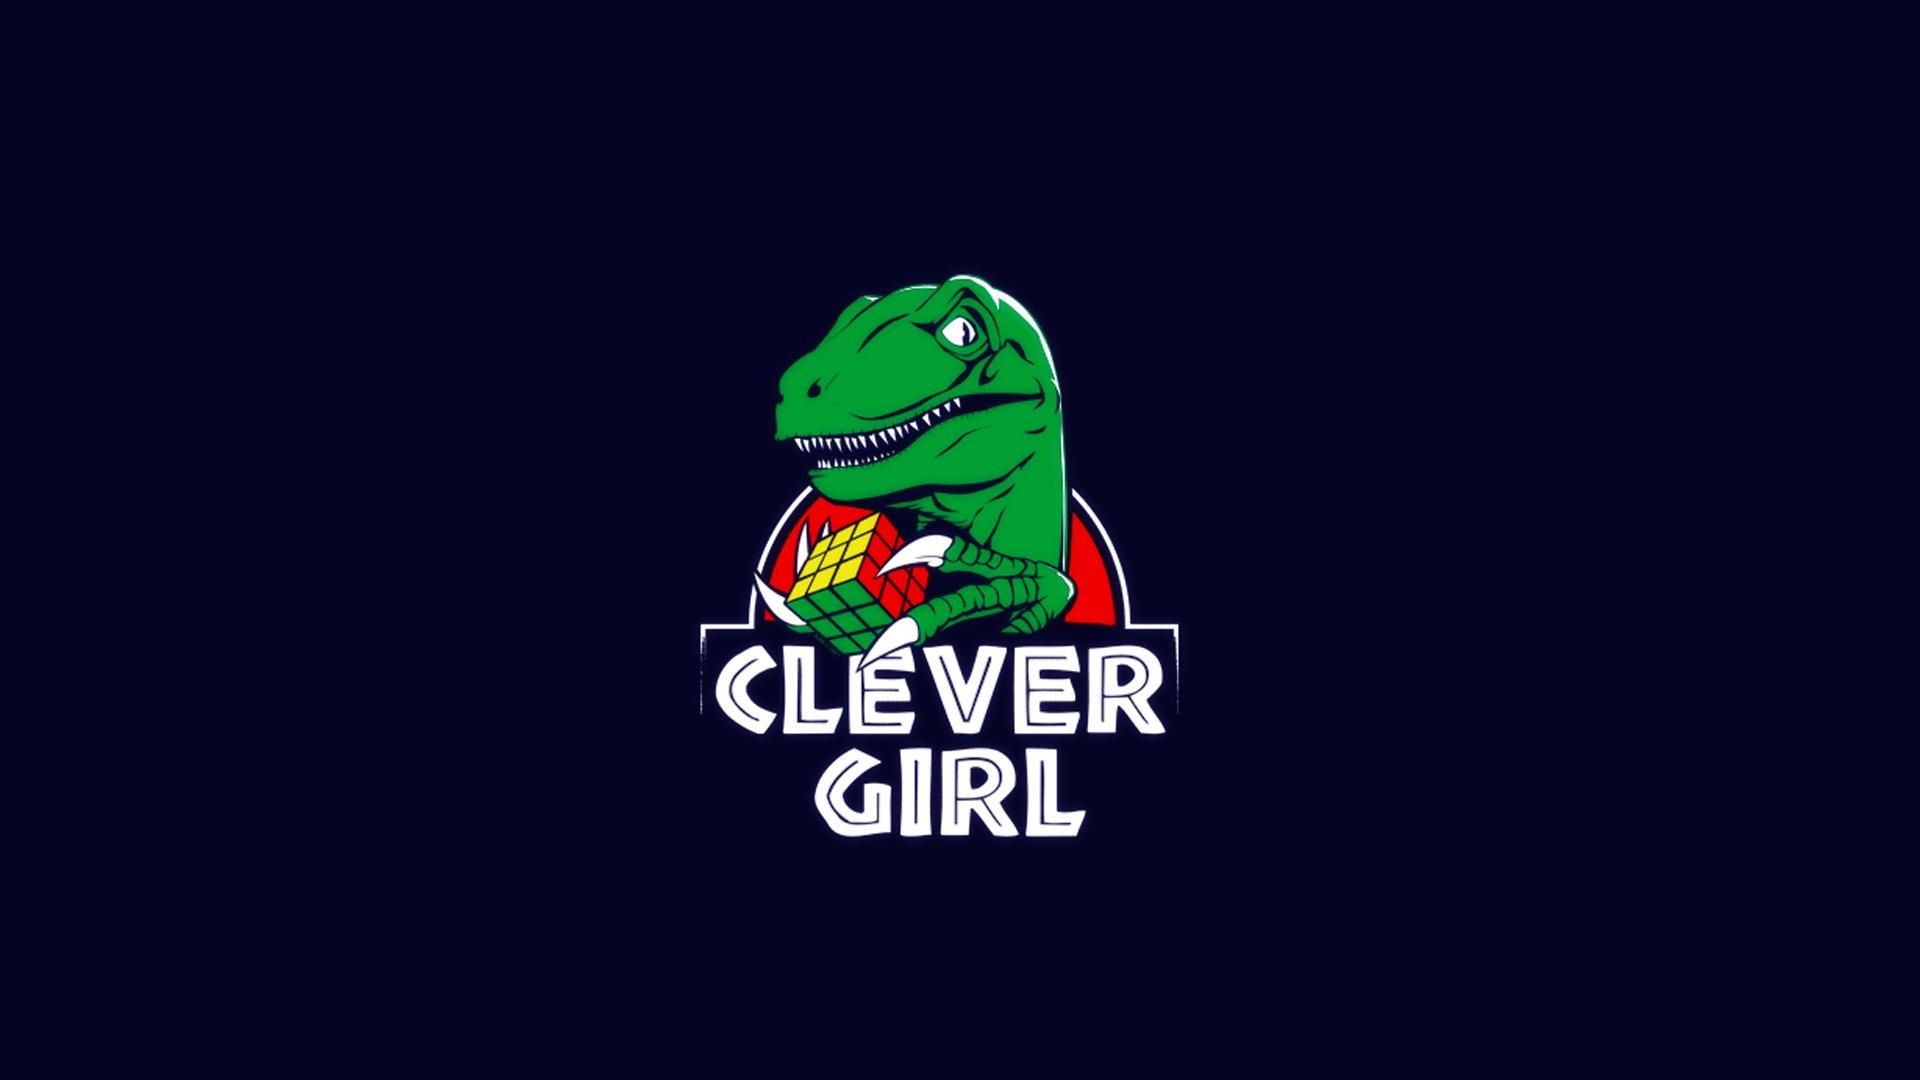 Clever Girl [1920x1080]